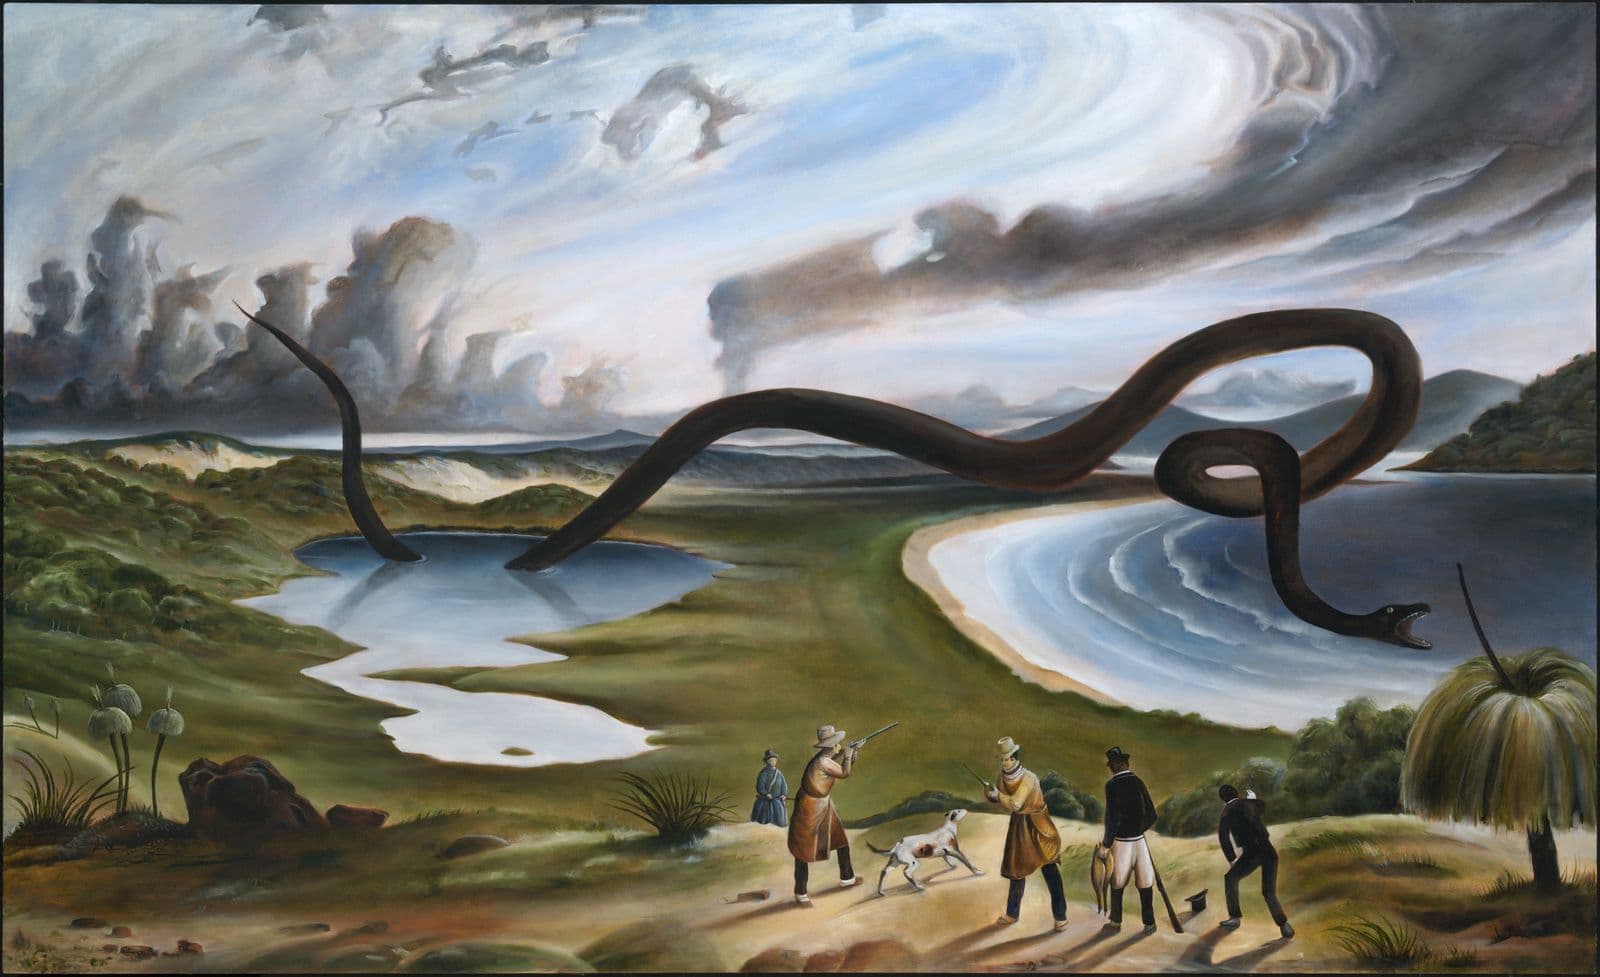 Landscape painting of hills and bodies of water. Out of the water flies a large black serpent. Below, five European hunter take aim at the serpent